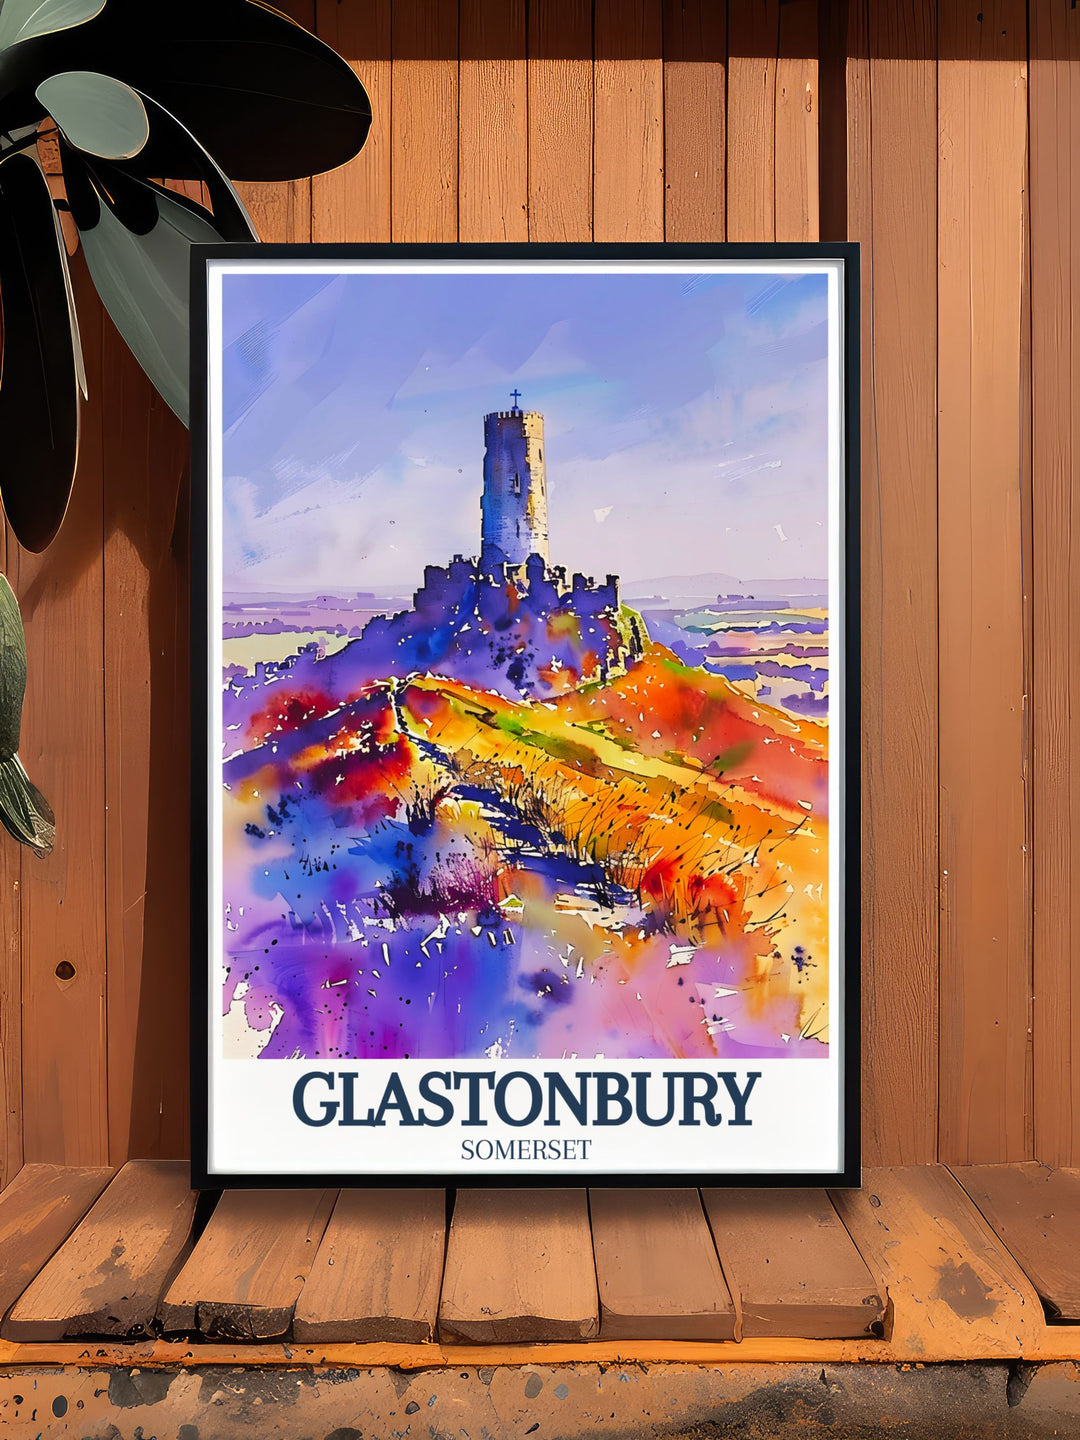 Gorgeous Glastonbury Tor artwork with St. Michaels tower and Somerset levels perfect for collectors of UK art and those looking for special Glastonbury gifts ideal for adding historical charm to any home decor.